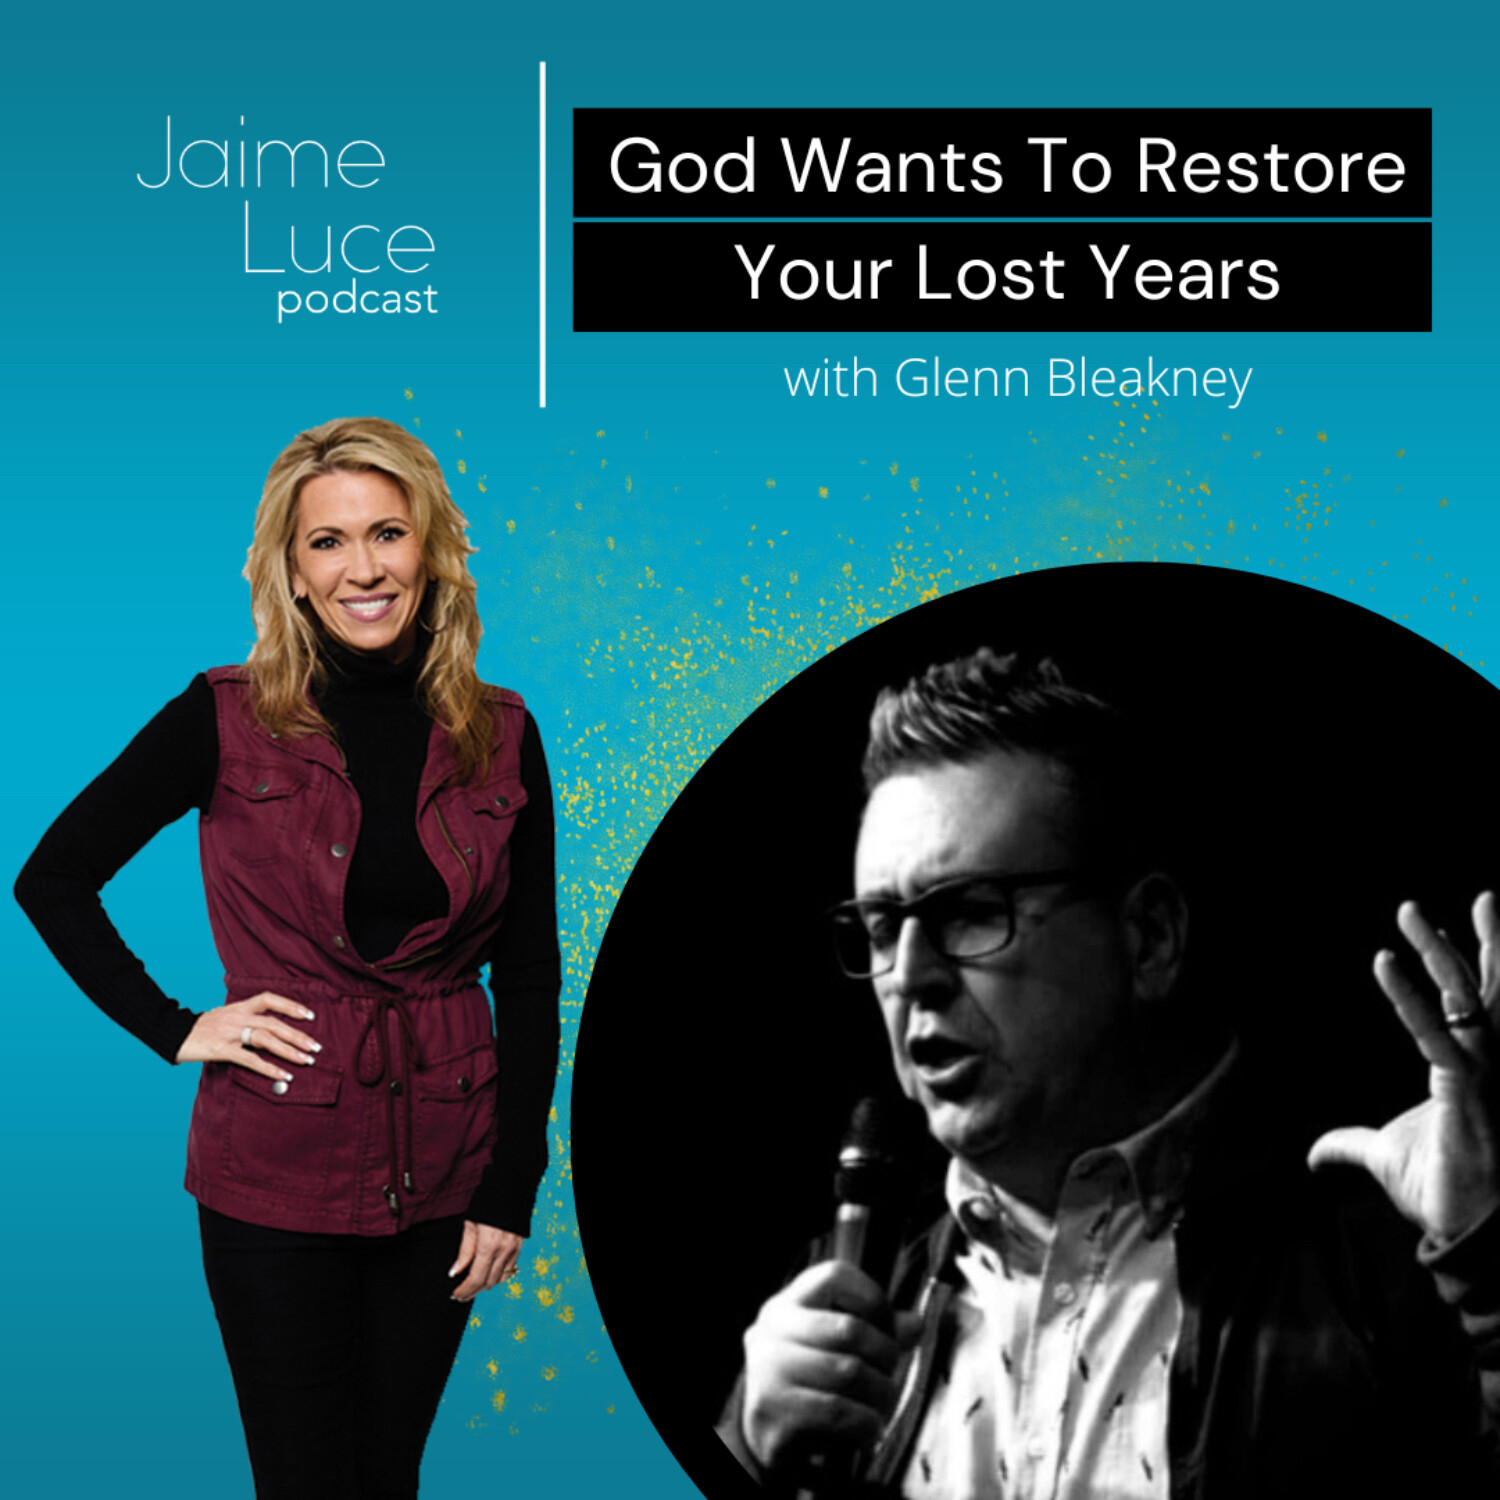 God Wants To Restore Your Lost Years with Glenn Bleakney